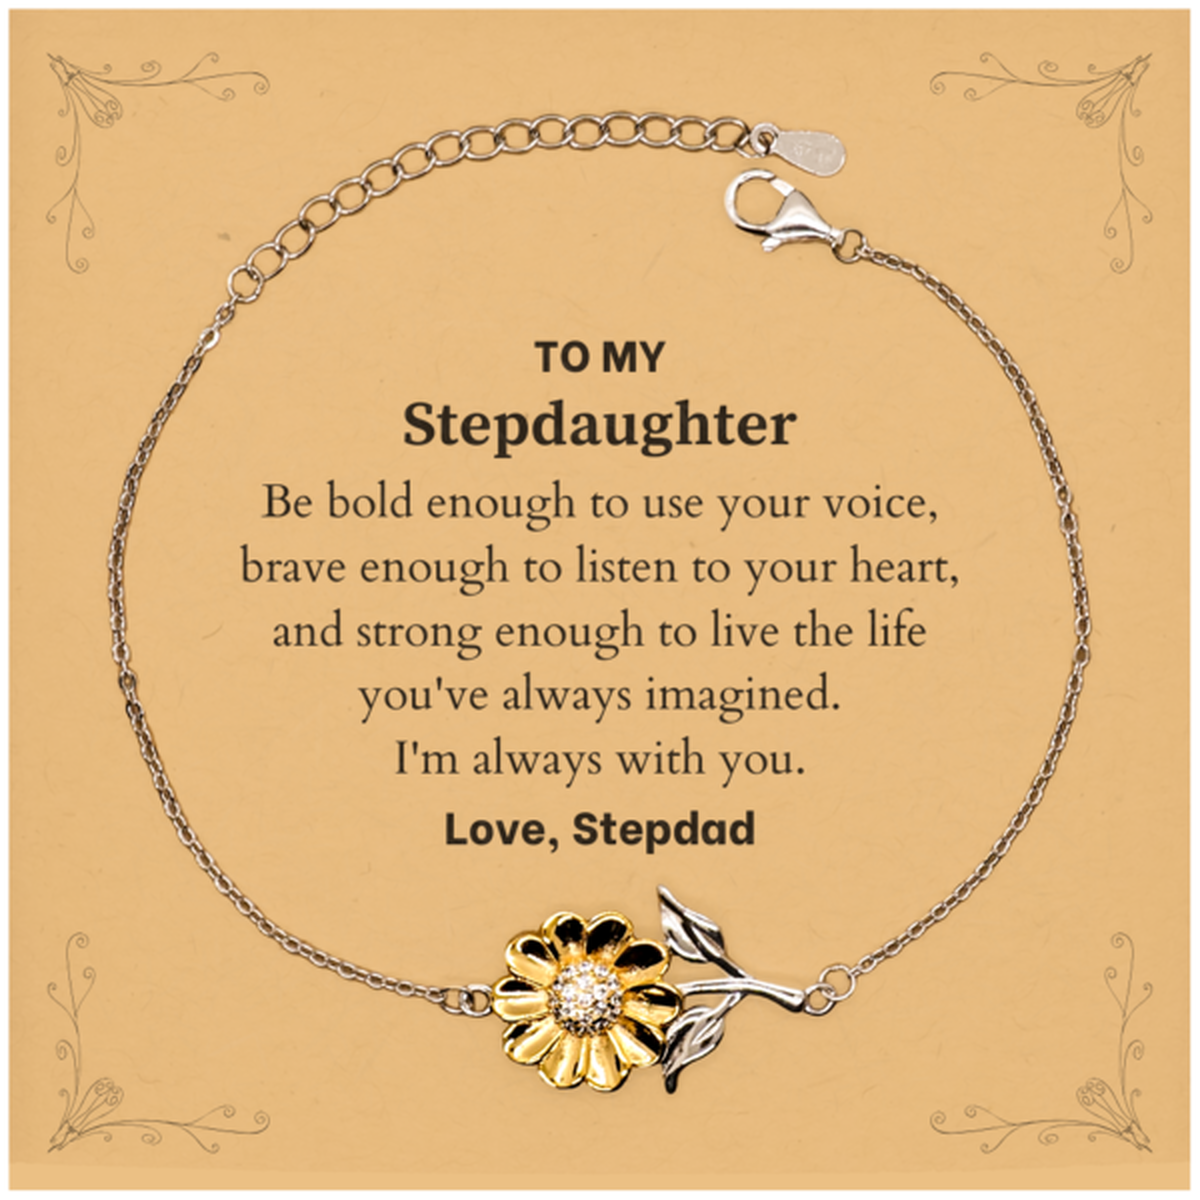 Keepsake Stepdaughter Sunflower Bracelet Gift Idea Graduation Christmas Birthday Stepdaughter from Stepdad, Stepdaughter Be bold enough to use your voice, brave enough to listen to your heart. Love, Stepdad